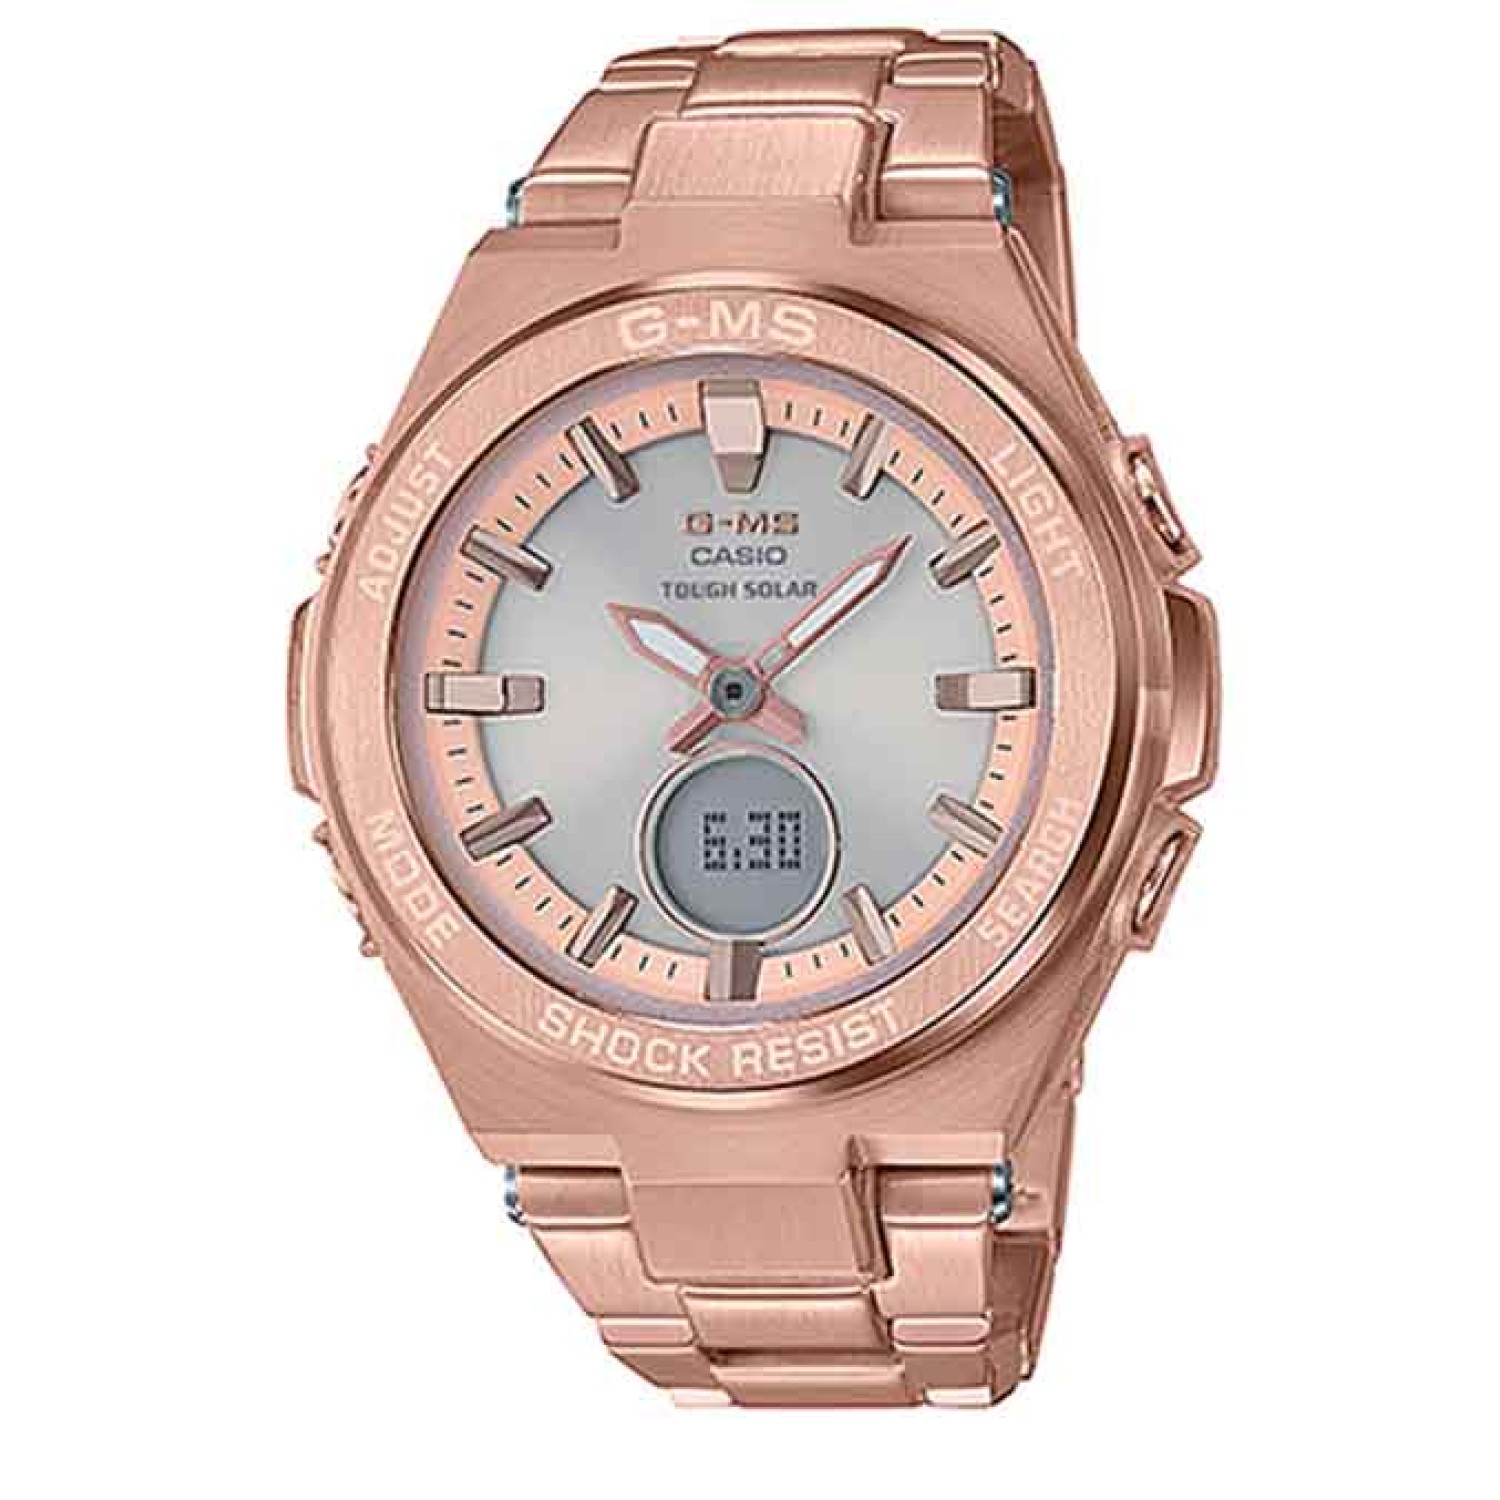 MSGS200DG-4A Casio BabY-G  G-MS Watches. From the BABY-G G-MS lineup of watches for the active and sophisticated woman of today comes a selection of cool new models with compact metal designs based on the MSG-S200 full metal watch. Cases, bezels, and band